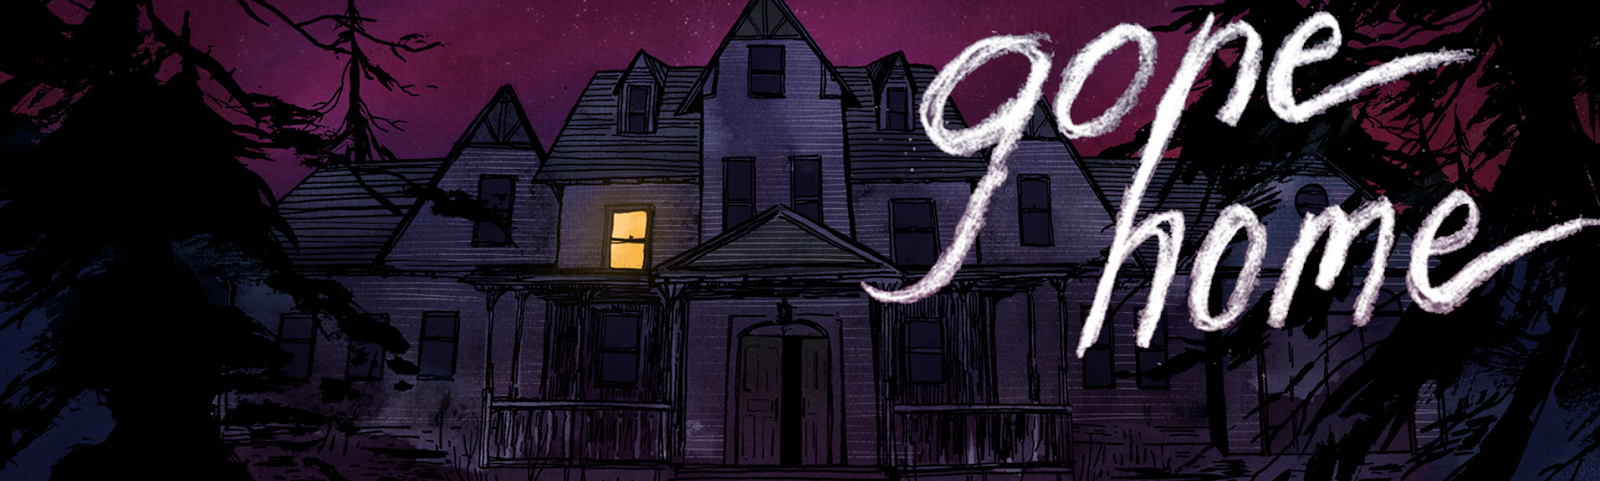 Gone home игра. Gone Home карта. Gone Home (2013). Gone Home логотип.